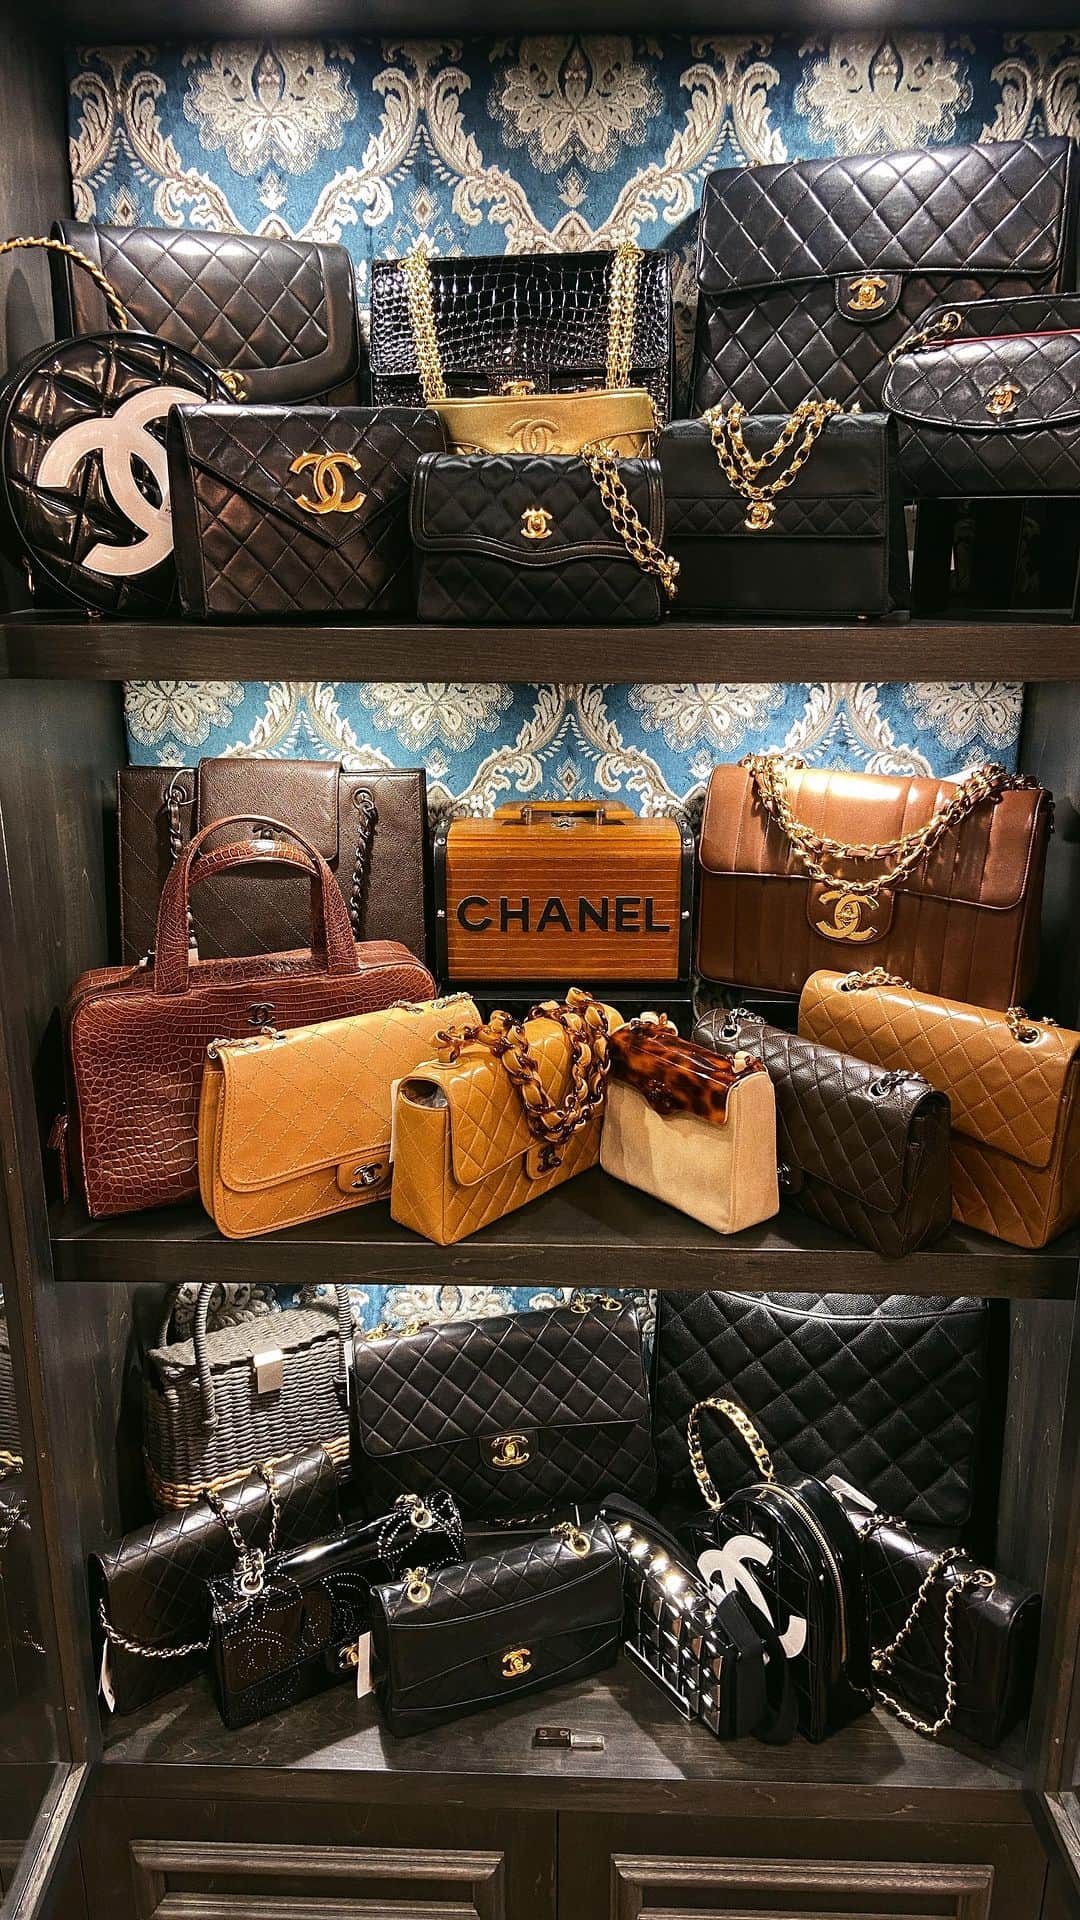 vintage Qooのインスタグラム：「Magic cabinet 🪄 All kind of the #ChanelVintage bags in here @vintageqoo   ▼Customer service English/Chinese/Korean/Japanese *Please feel free to contact us! *商品が見つからない場合にはDMにてお問い合わせください   ▼International shipping via our online store. Link in bio.  #tokyovintageshop #오모테산도 #omotesando #aoyama #表参道 #명품빈티지 #빈티지패션 #도쿄빈티지샵  #ヴィンテージファッション #ヴィンテージショップ  #chanelvintage #chanel #vintagechanel #chanelclassic #chanellover #빈티지샤넬 #샤넬  #シャネル #샤넬클래식」